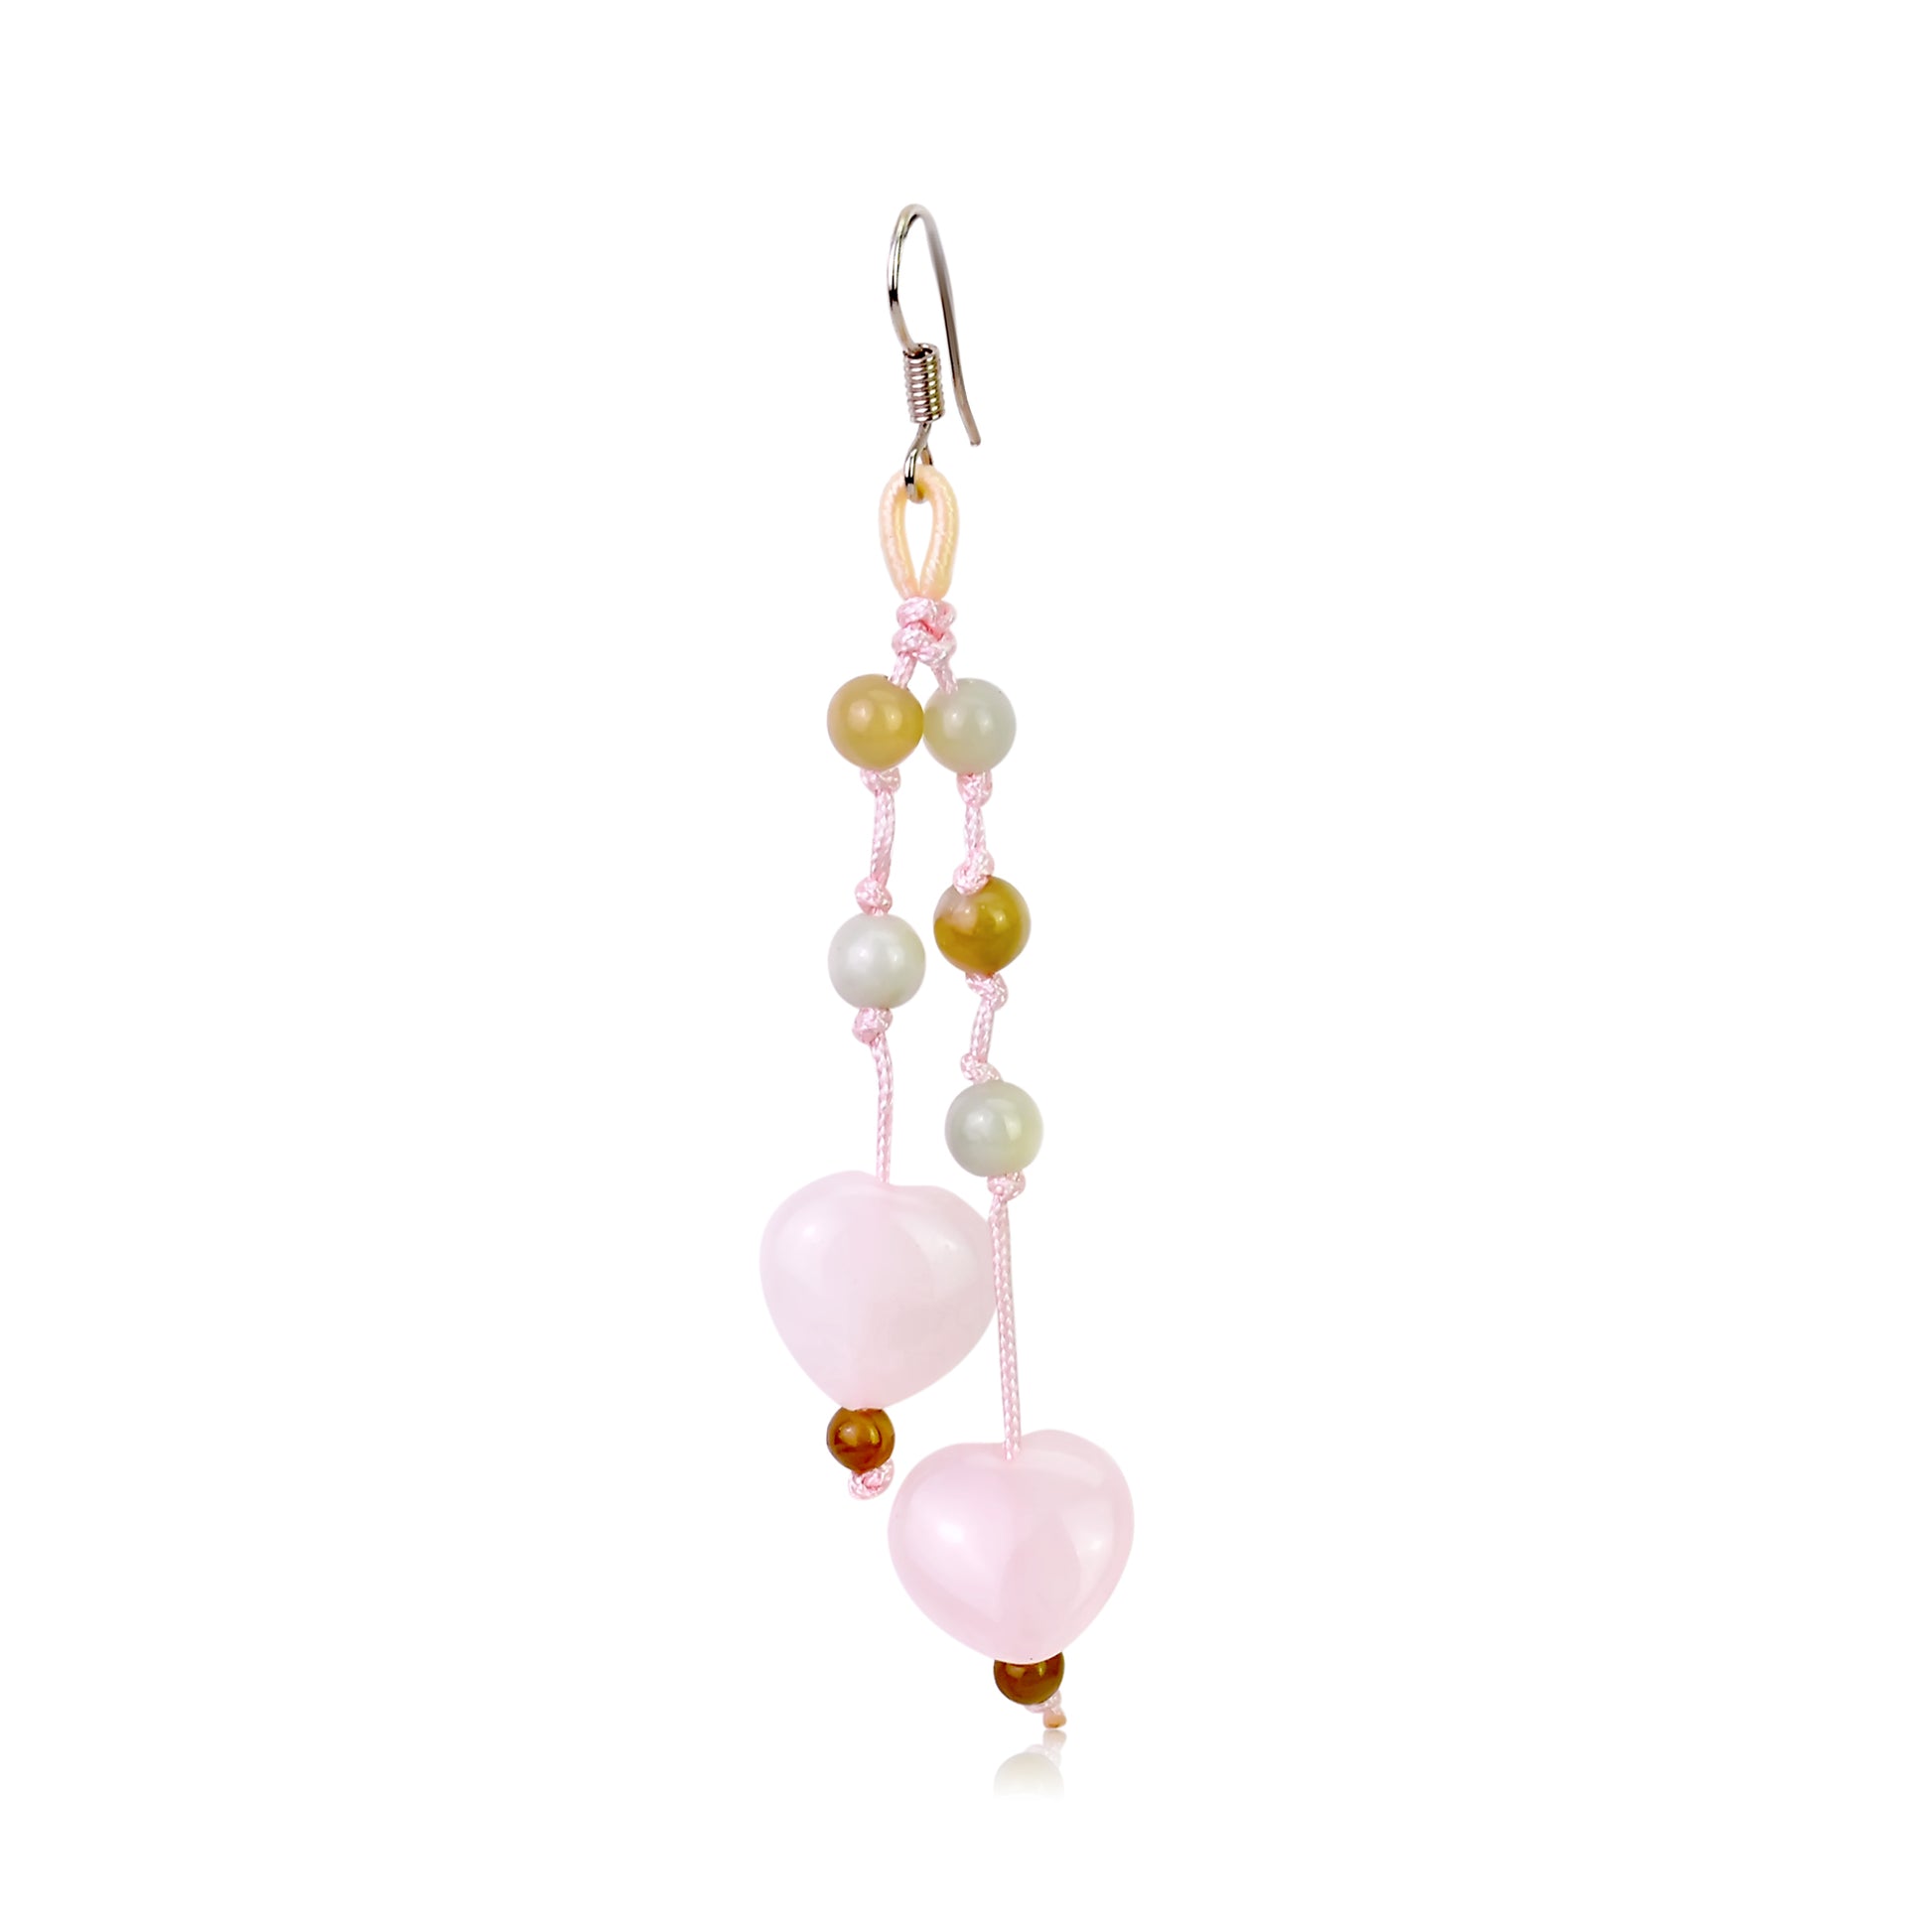 Show Off Your Style with Rose Quartz Heart Earrings made with Pink Cord